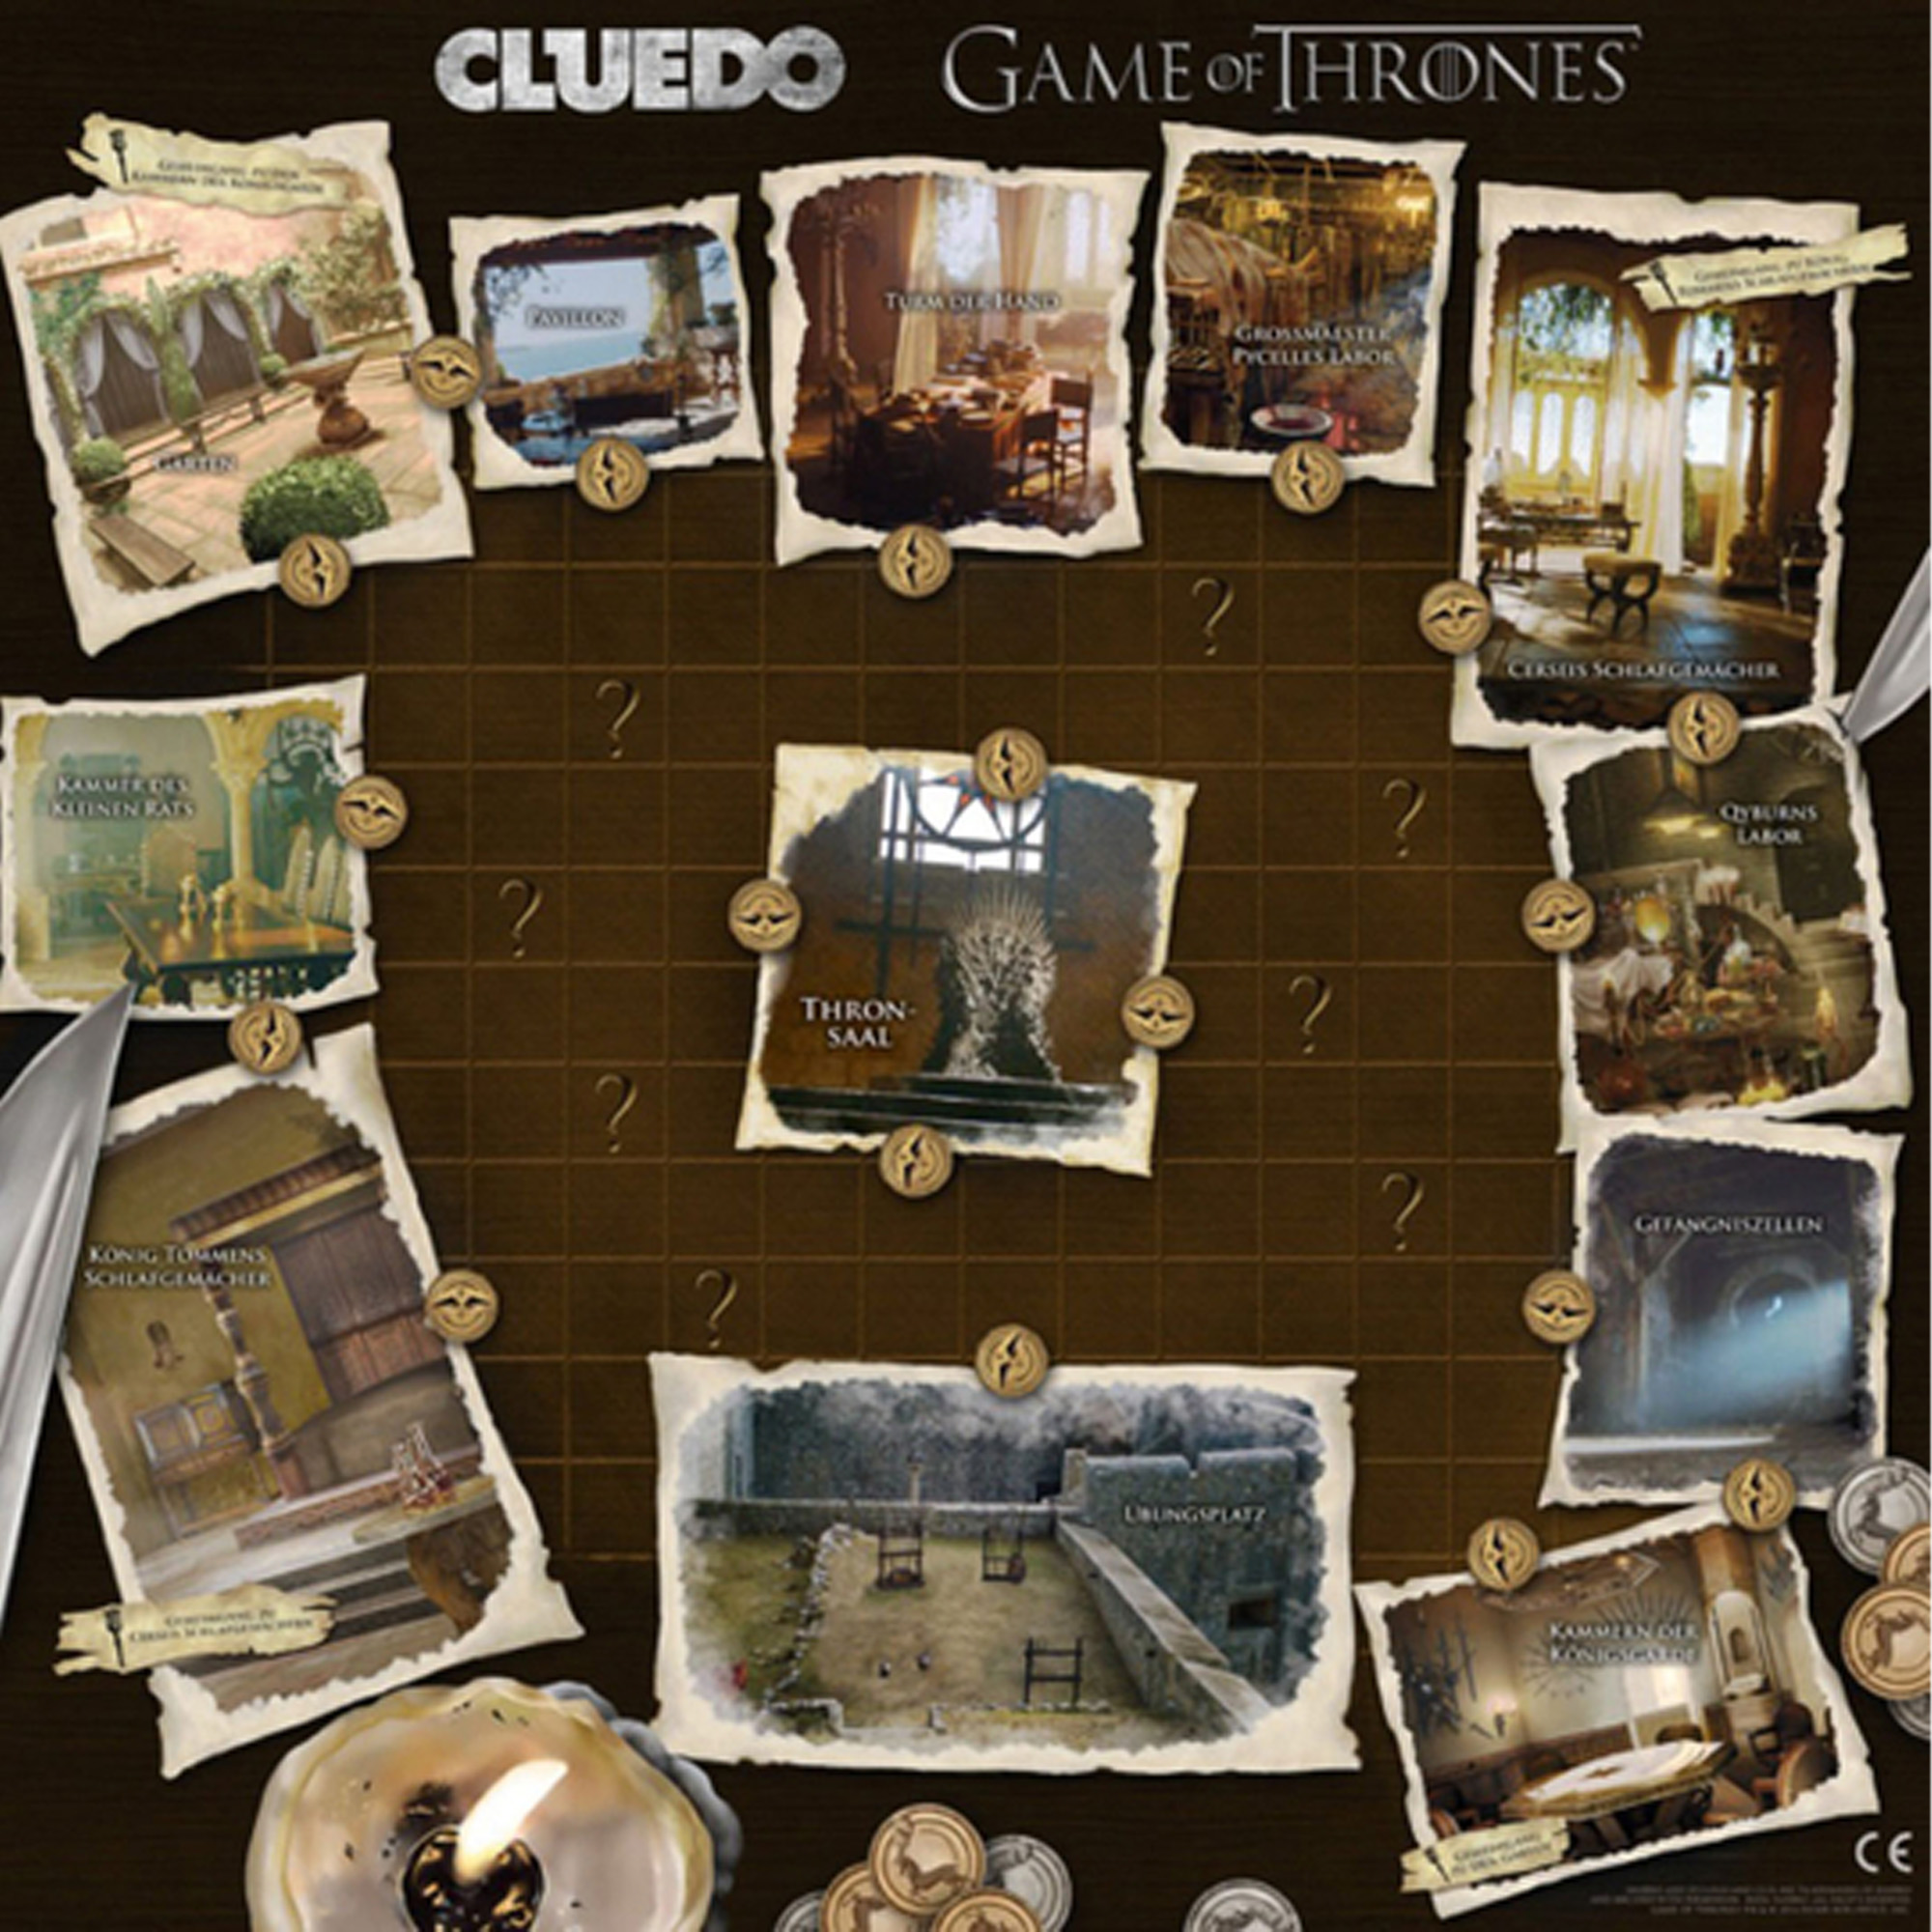 Cluedo Game of Thrones (Collector's Edition)